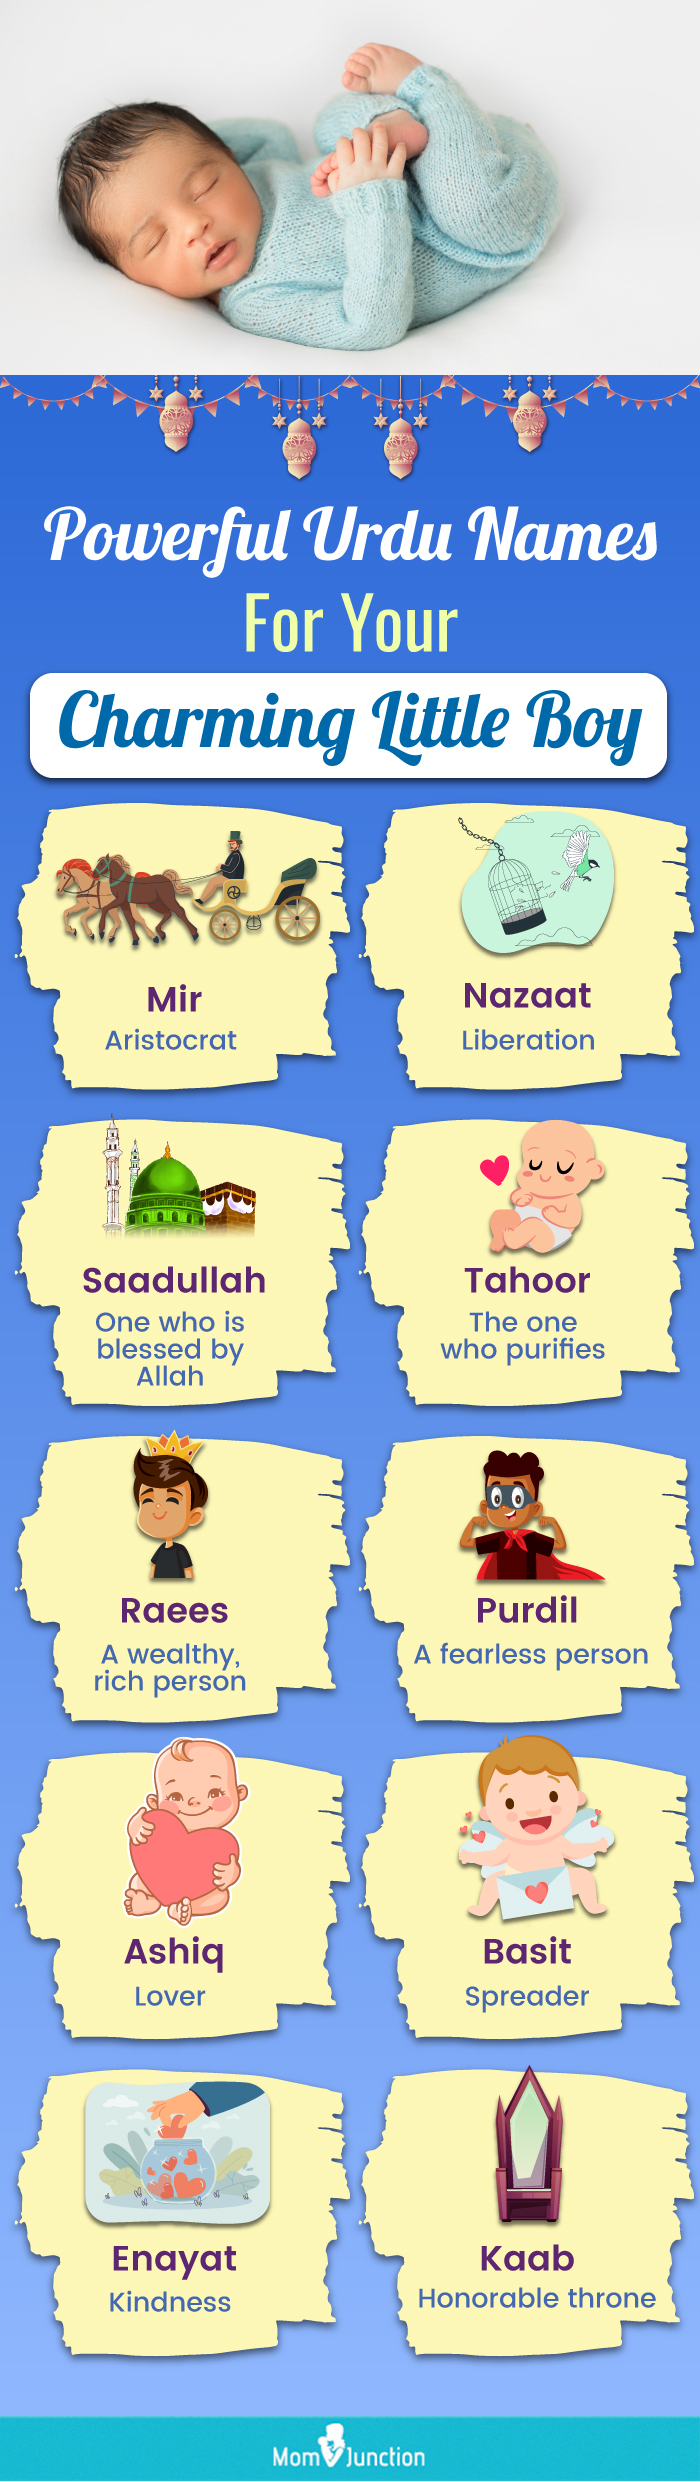 powerful urdu names for your charming little boy (infographic)